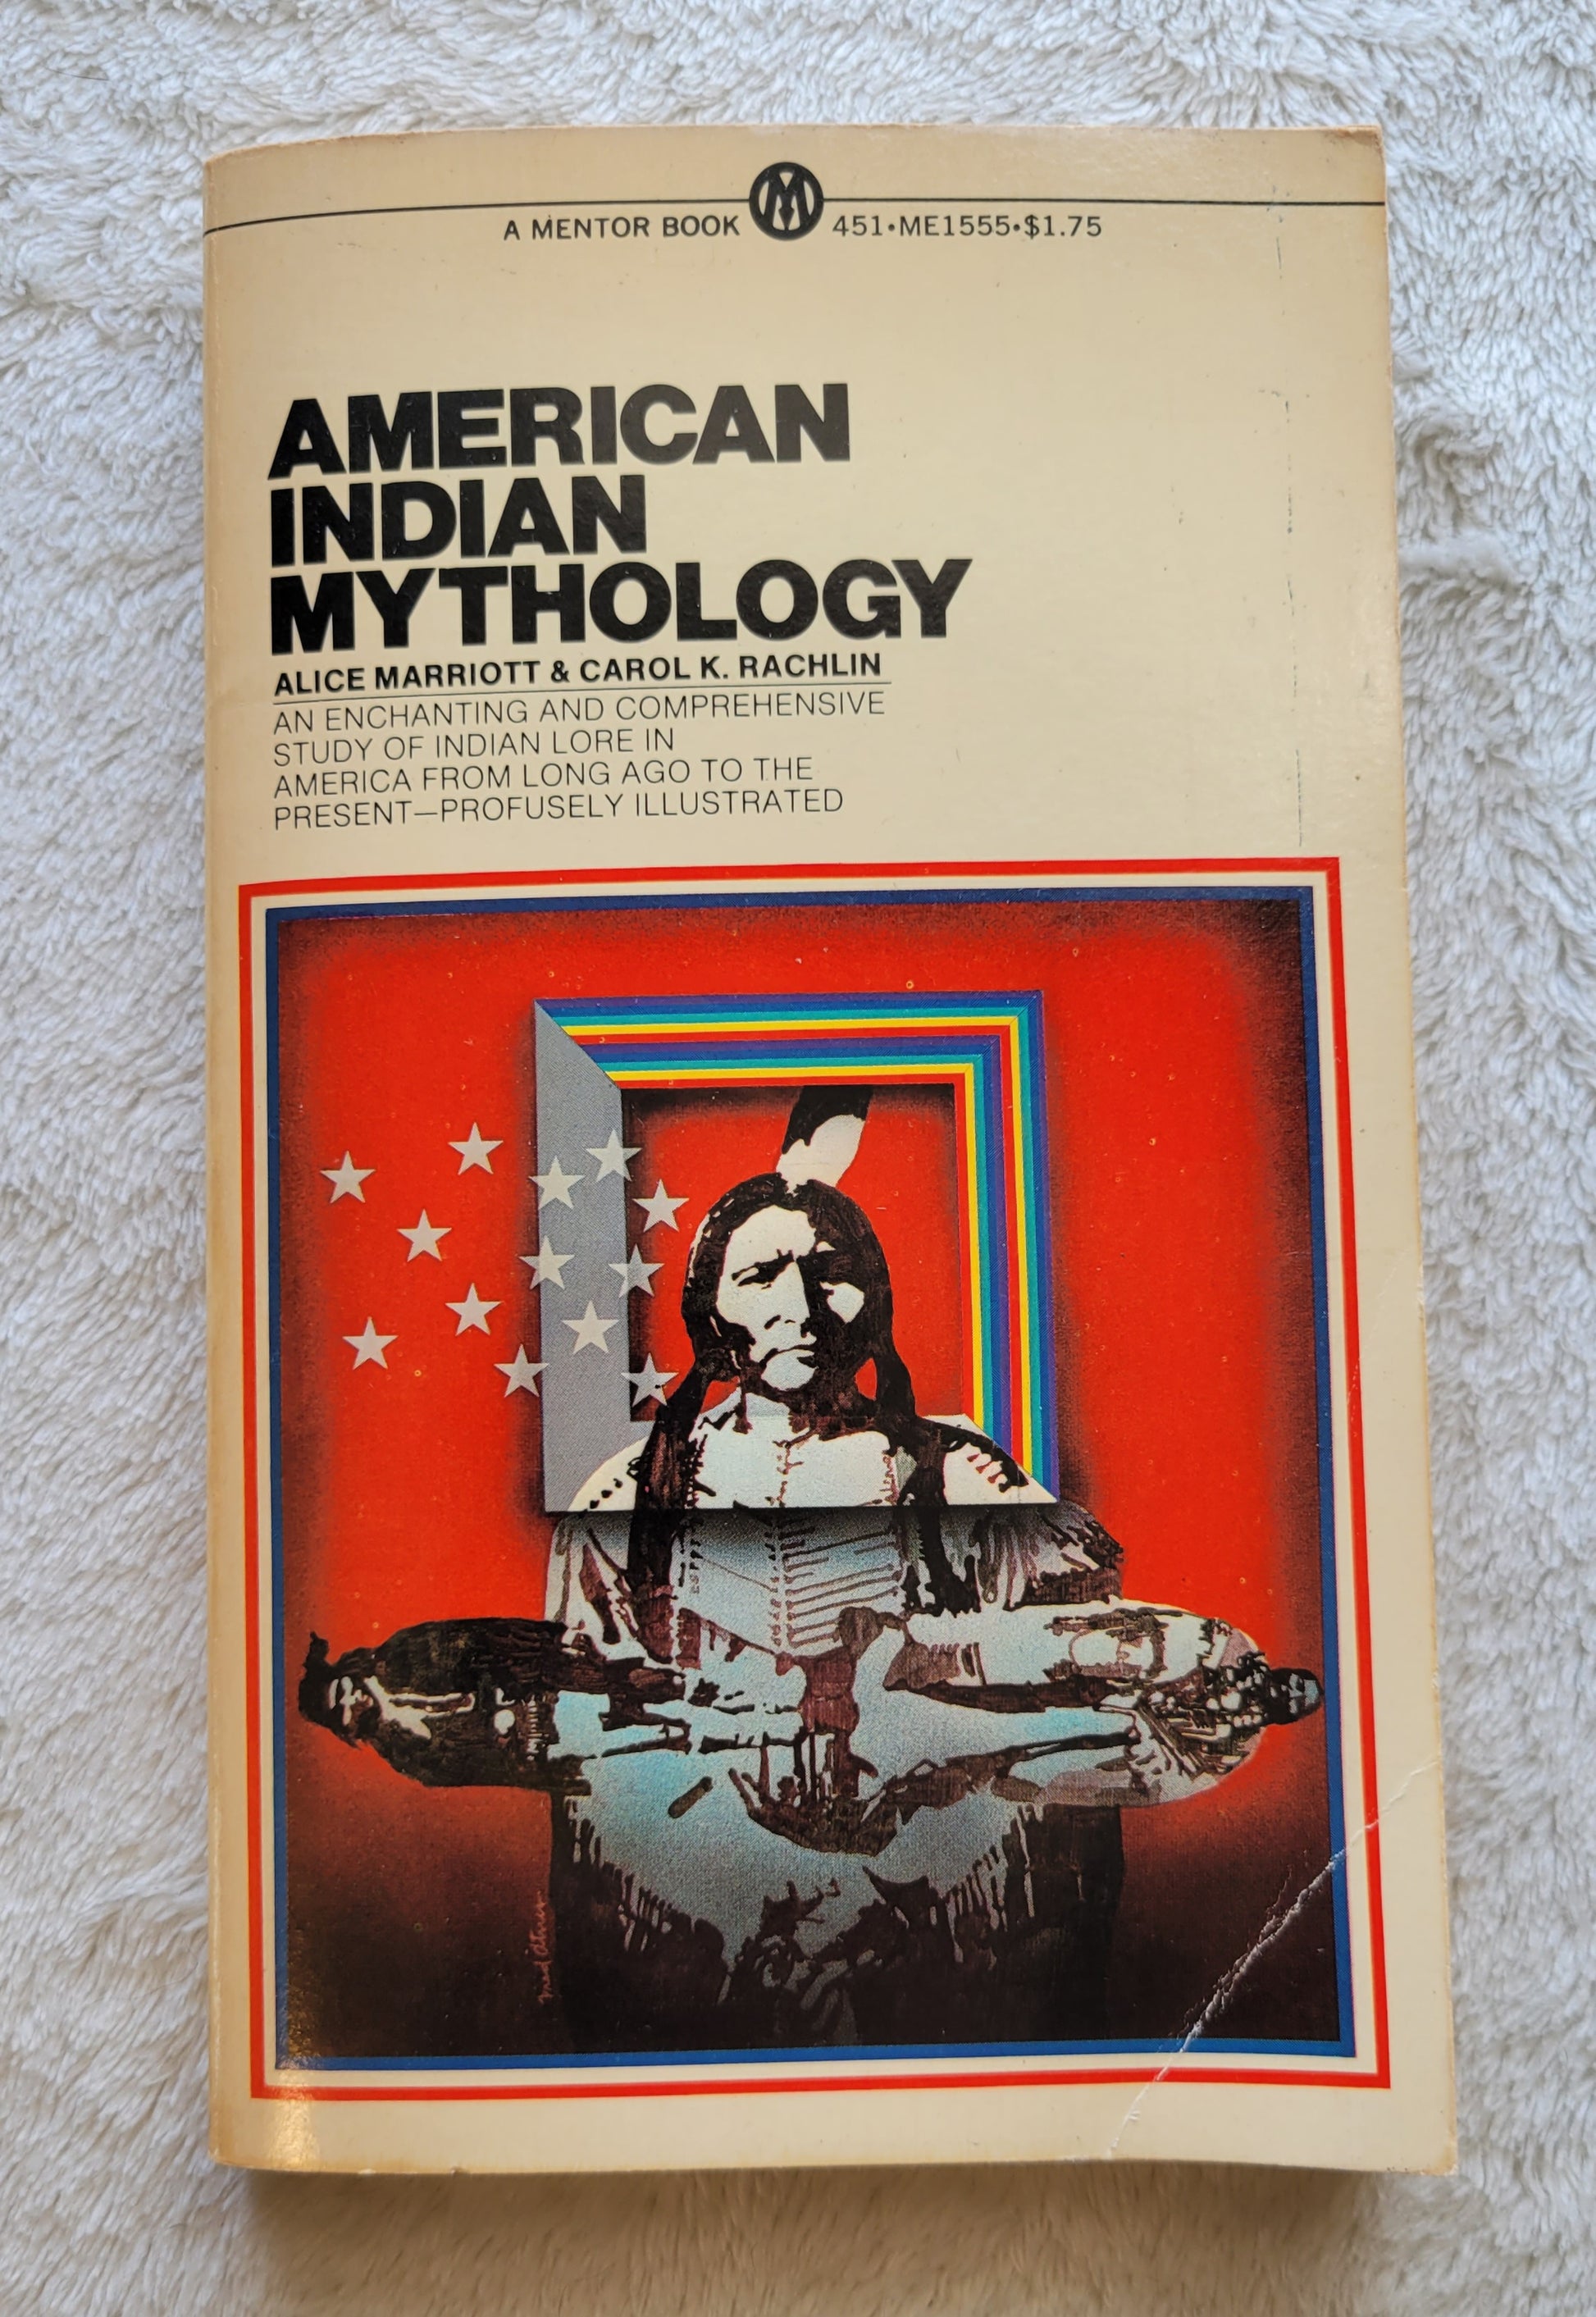 "American Indian Mythology: An Enchanting and Comprehensive study of Indian Lore in America from Long Ago to Present - Profusely Illustrated", by anthropologists Alice Marriott & Carol K. Rachlin, 1968, The New American Library. Size: 4.25" x 7.1" x 0.375" View of front cover.